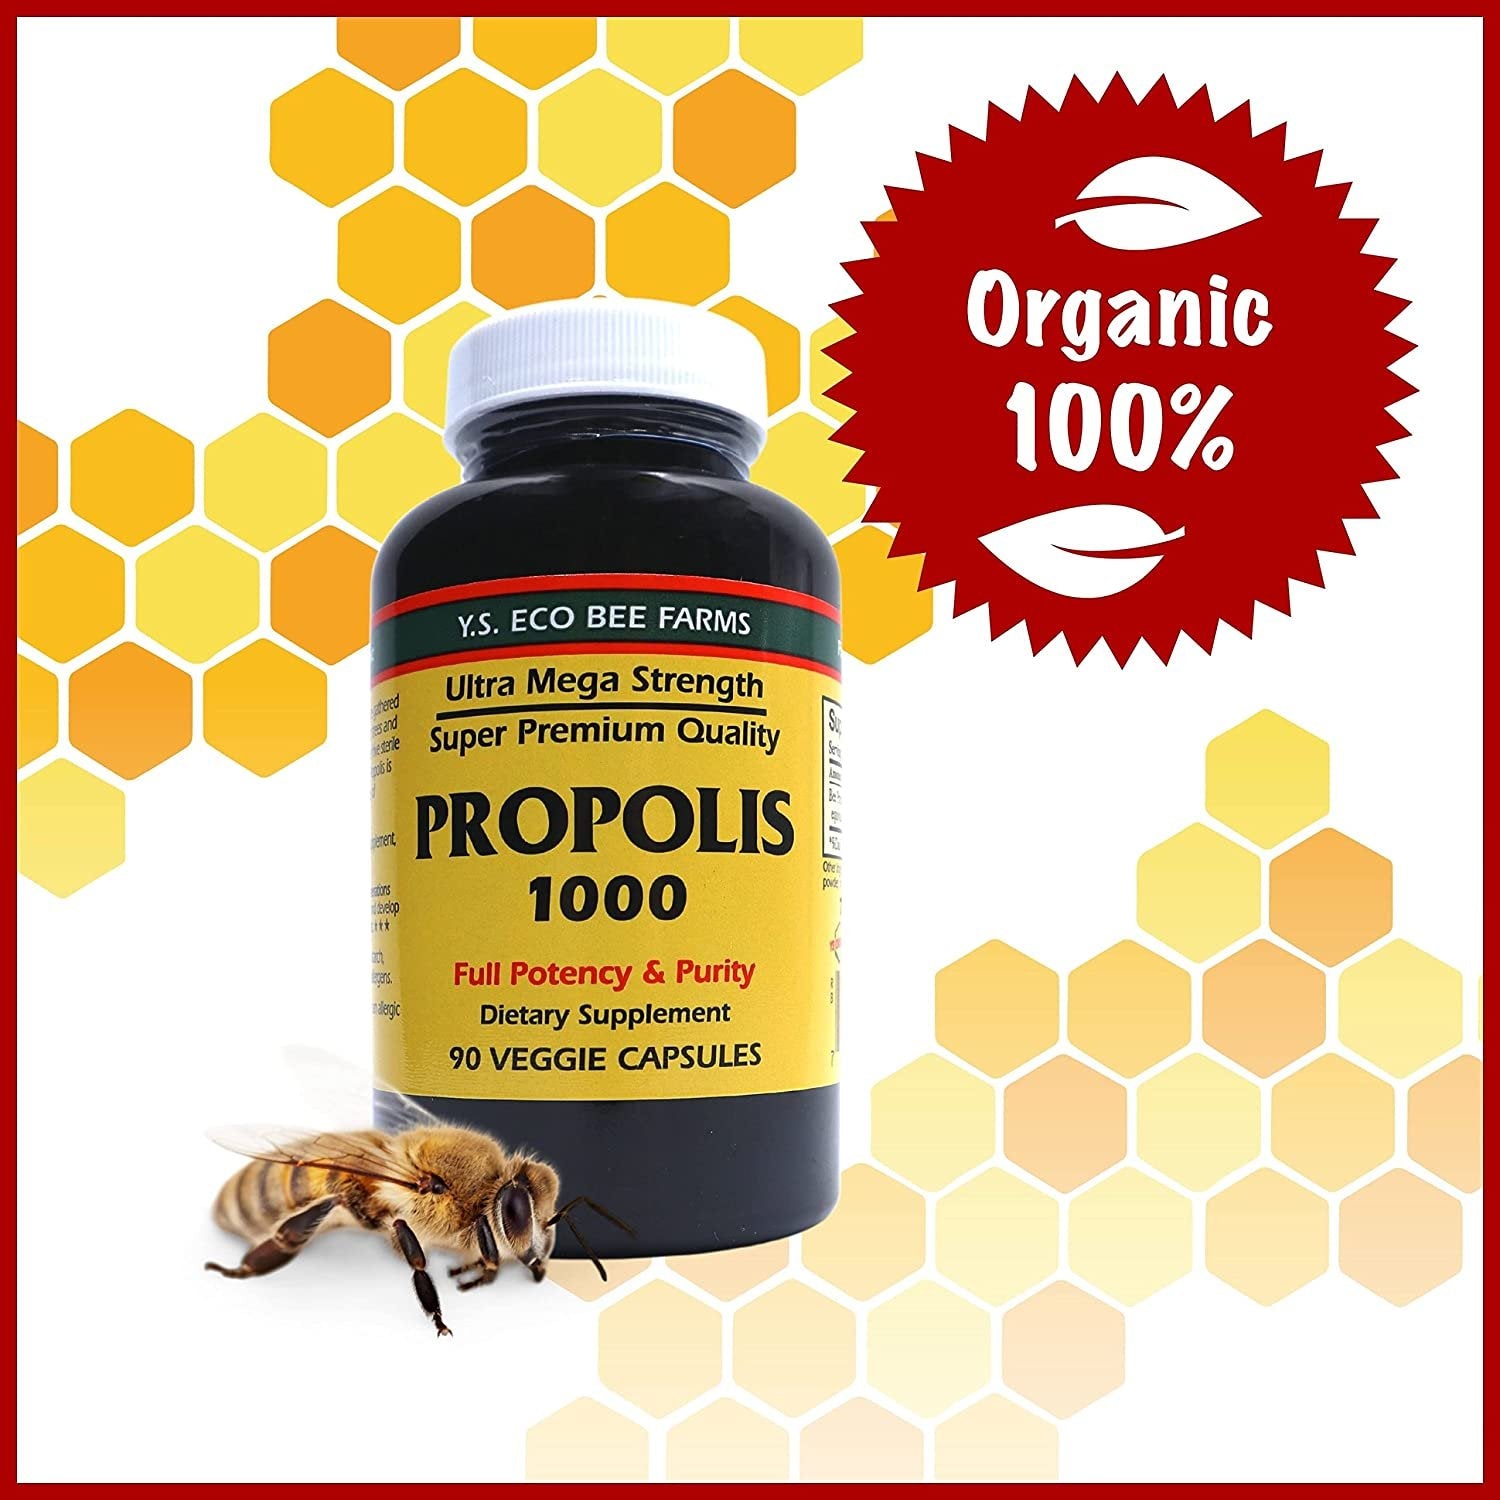 Y.S. Eco Bee Farms Ultra Mega Strength Propolis 1000 Dietary Supplement - 90 Ct Veggie Capsules - Organic Bee Pollen Supplement for Optimal Health and Wellness